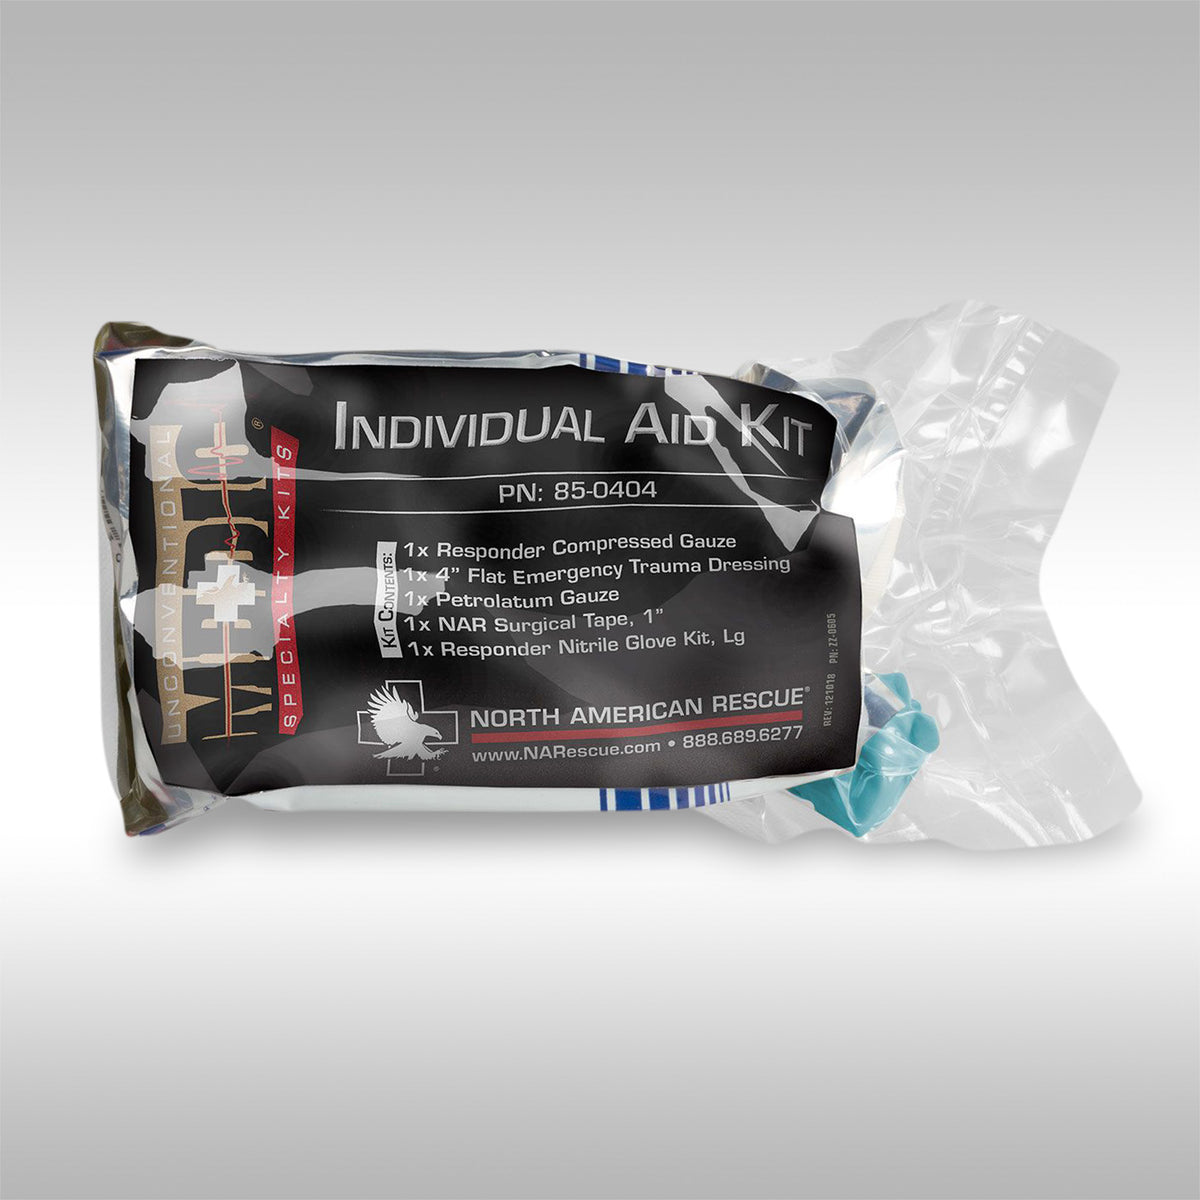 NORTH AMERICAN RESCUE - INDIVIDUAL AID KIT